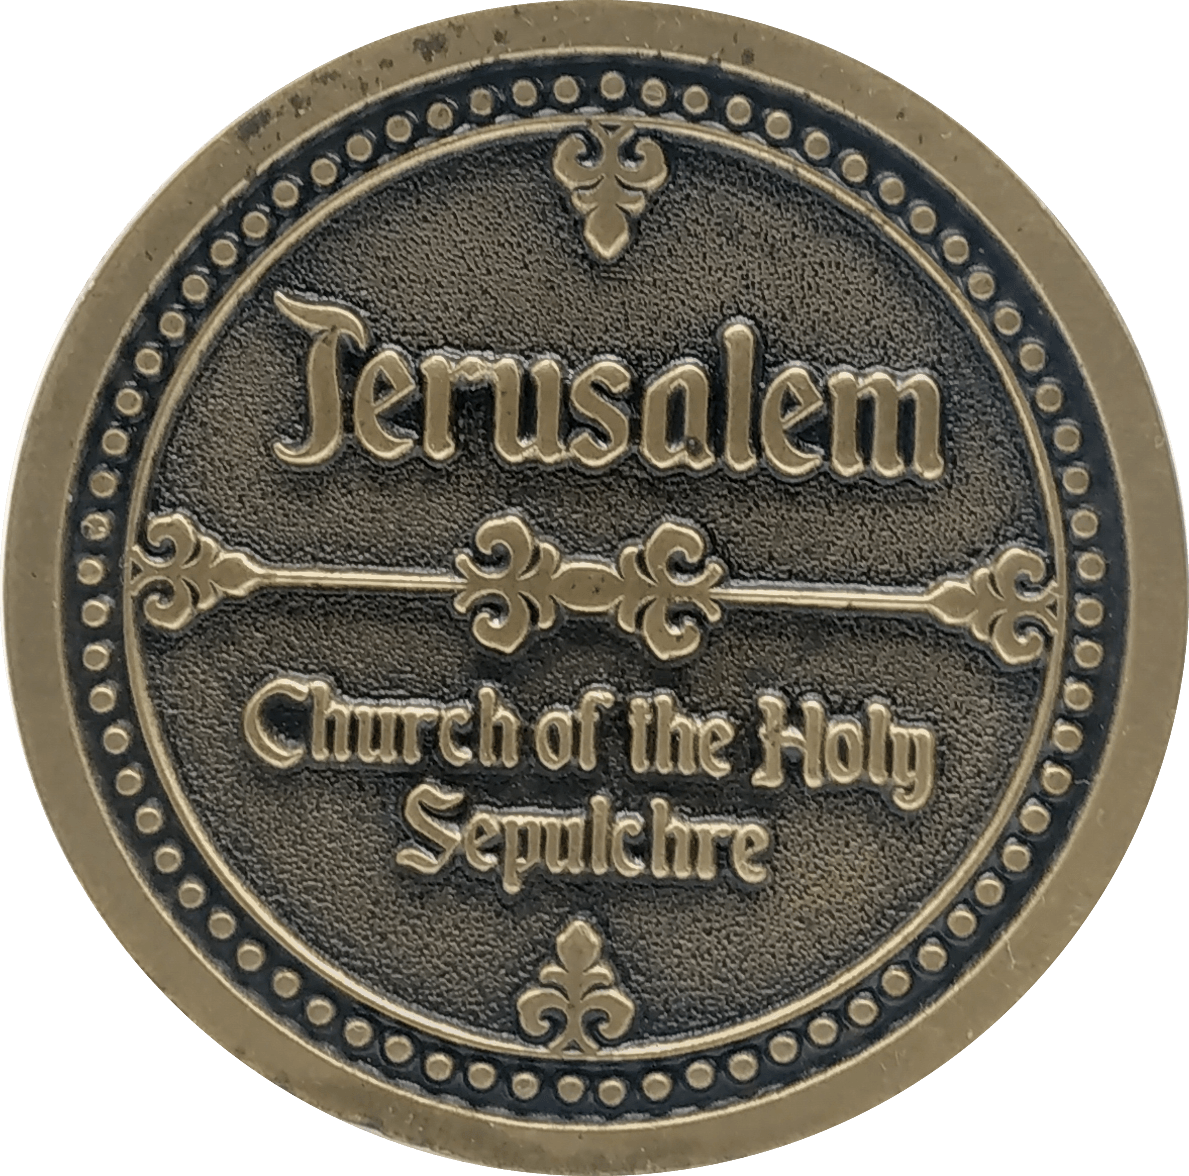 Holy Land Israel Church Coins: Church of The Holy Sepulchre, Basilica of The Annunciation, Church of The Nativity Coin Israel Souvenir from The Holyland (Silver Color) - Spring Nahal